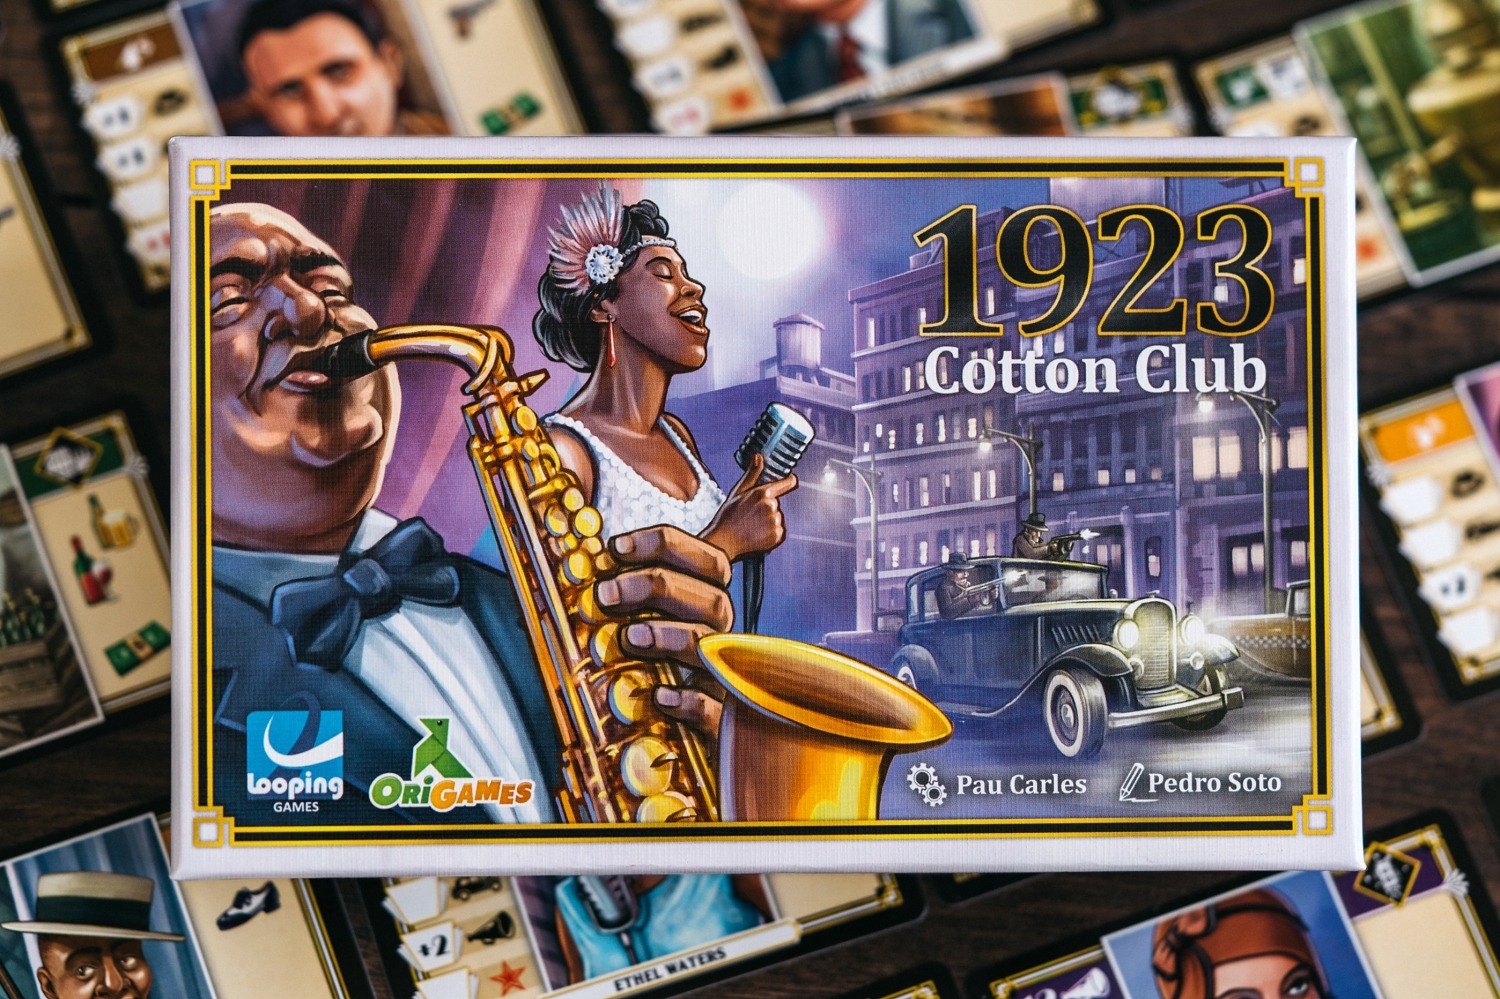 Cotton club 1923 Origames looping games 